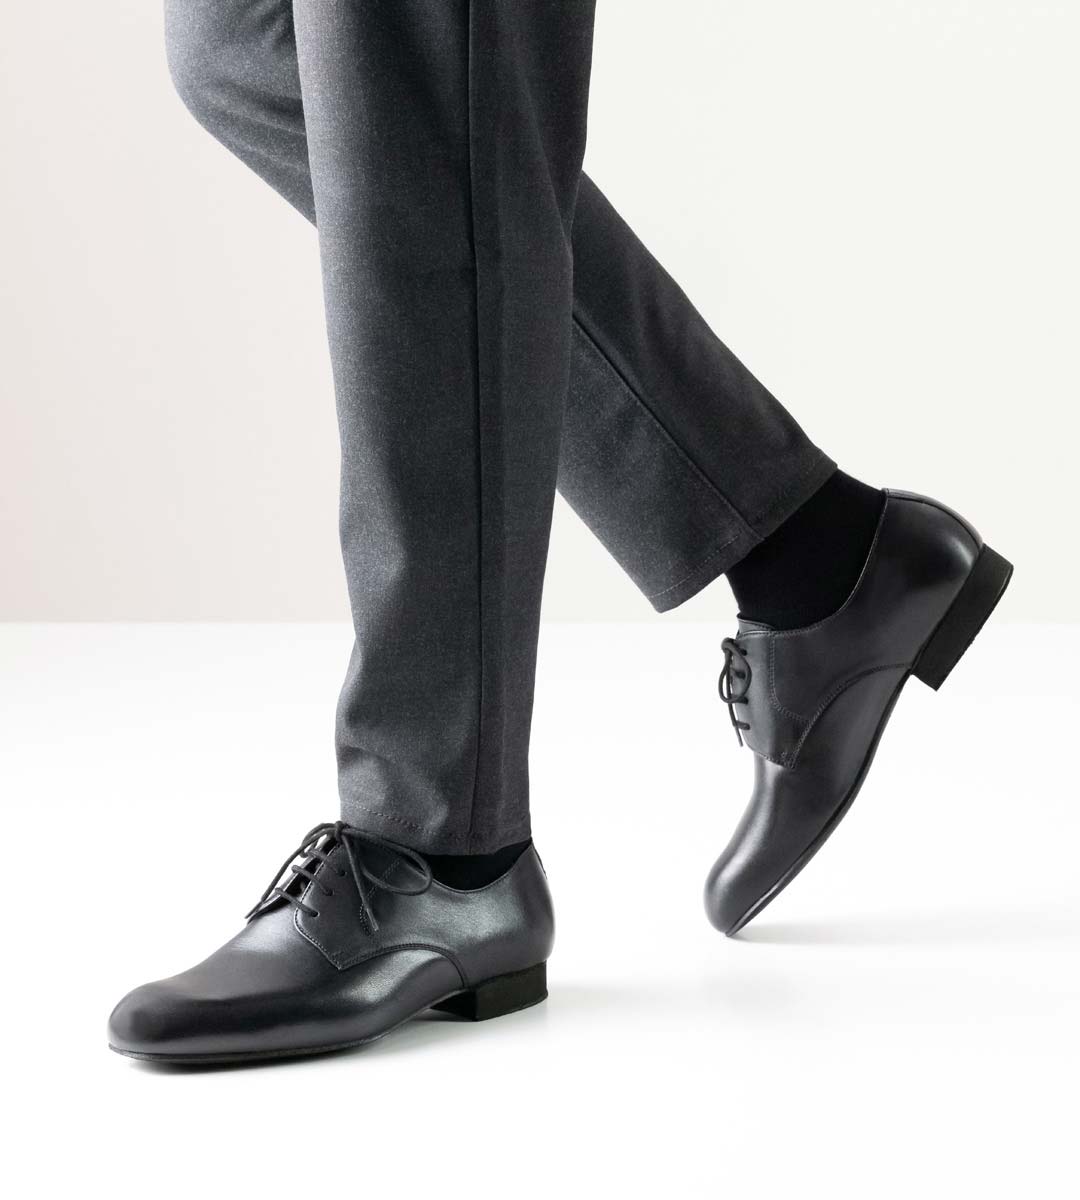 Men's dance shoe for wide feet by Werner Kern with leather lining